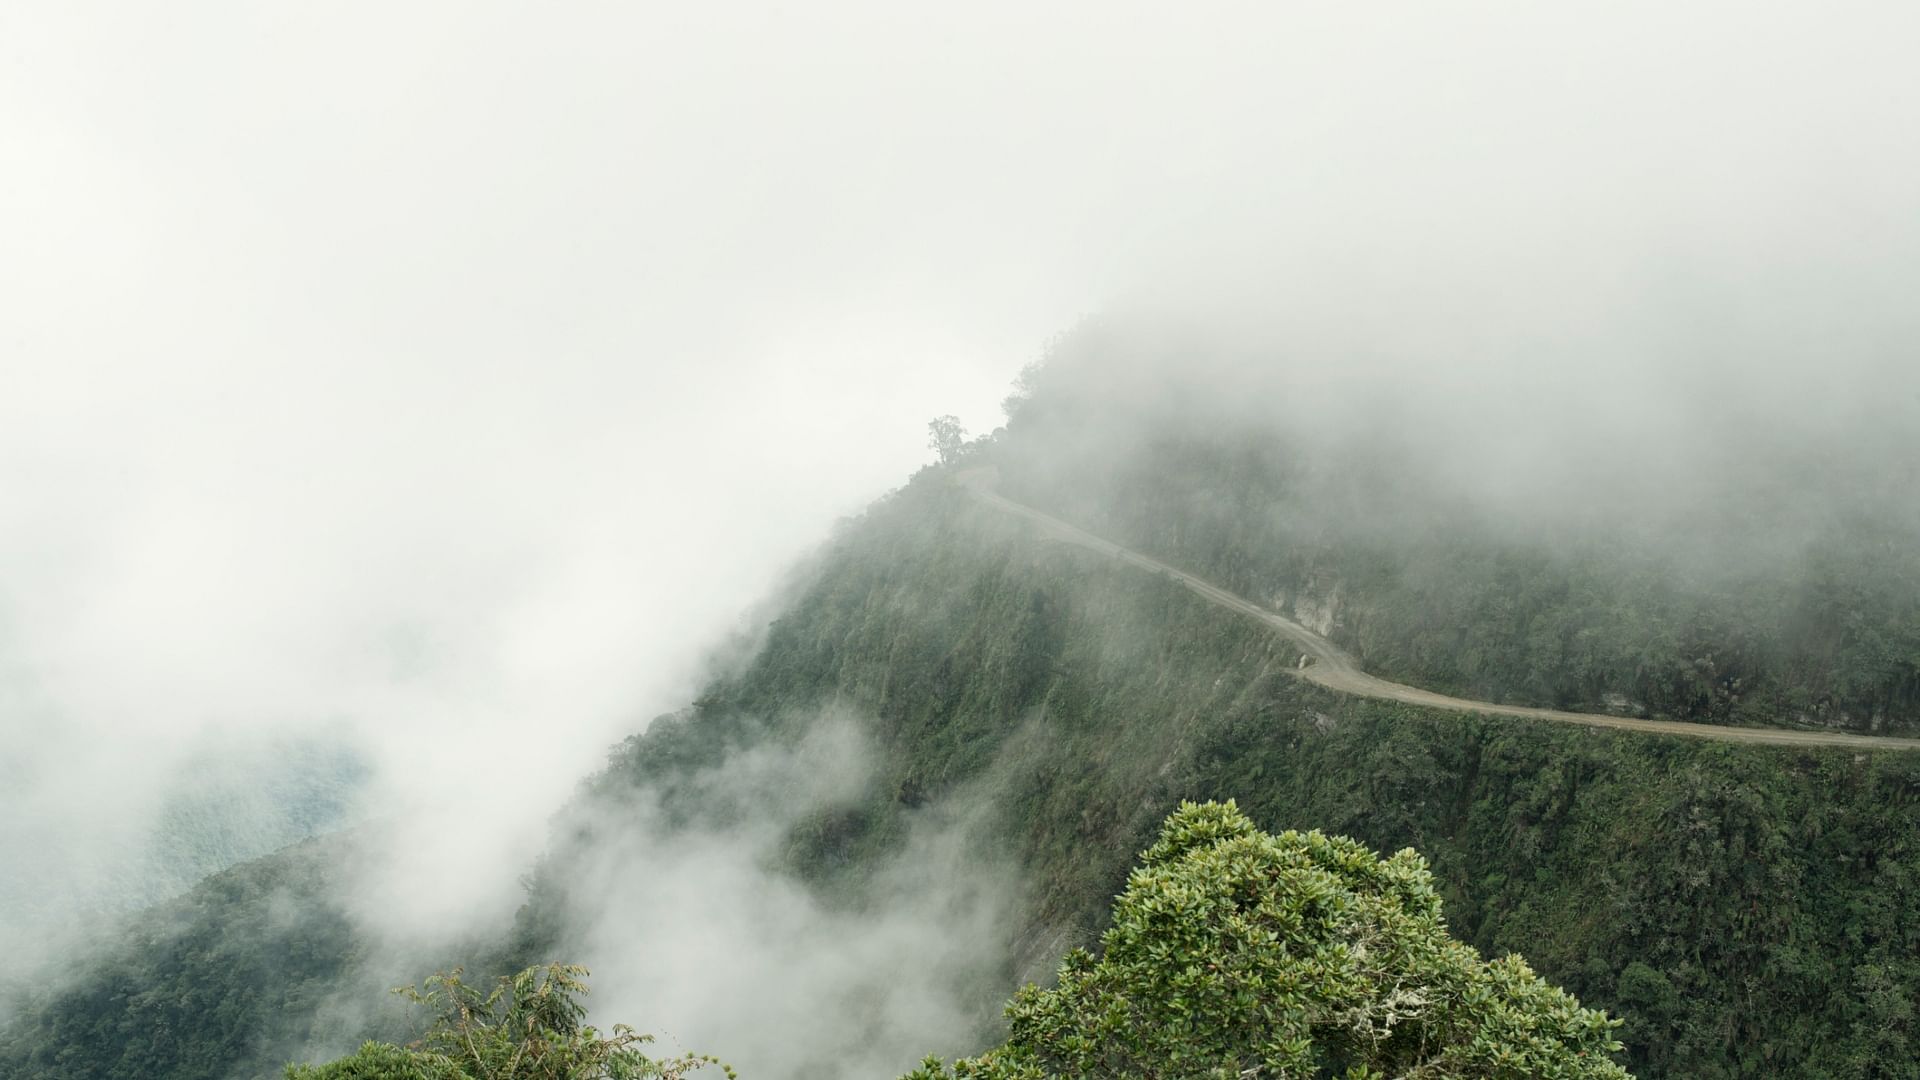 World Most Dangerous Road 200 to 300 people die every year death road bolivia